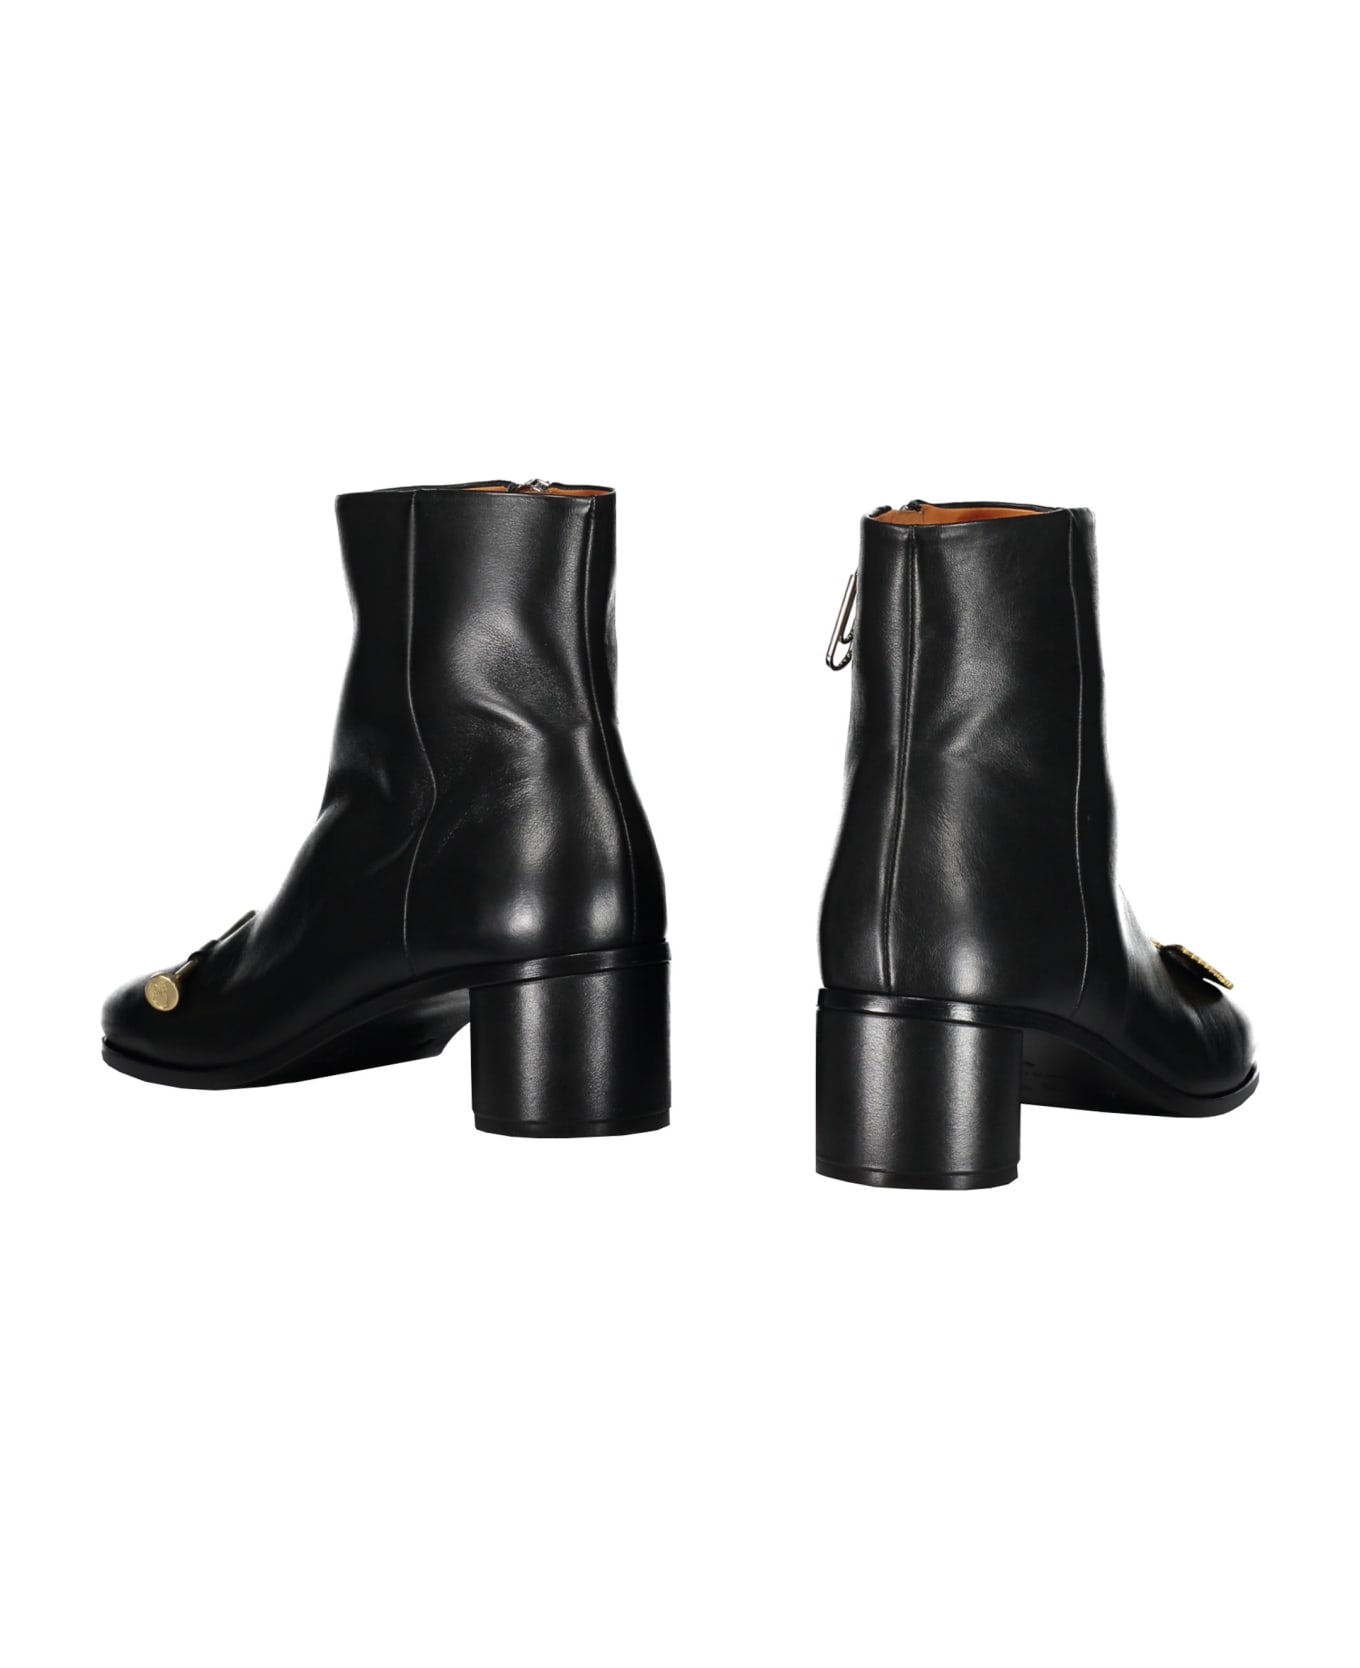 Off-White Leather Ankle Boots - black ブーツ